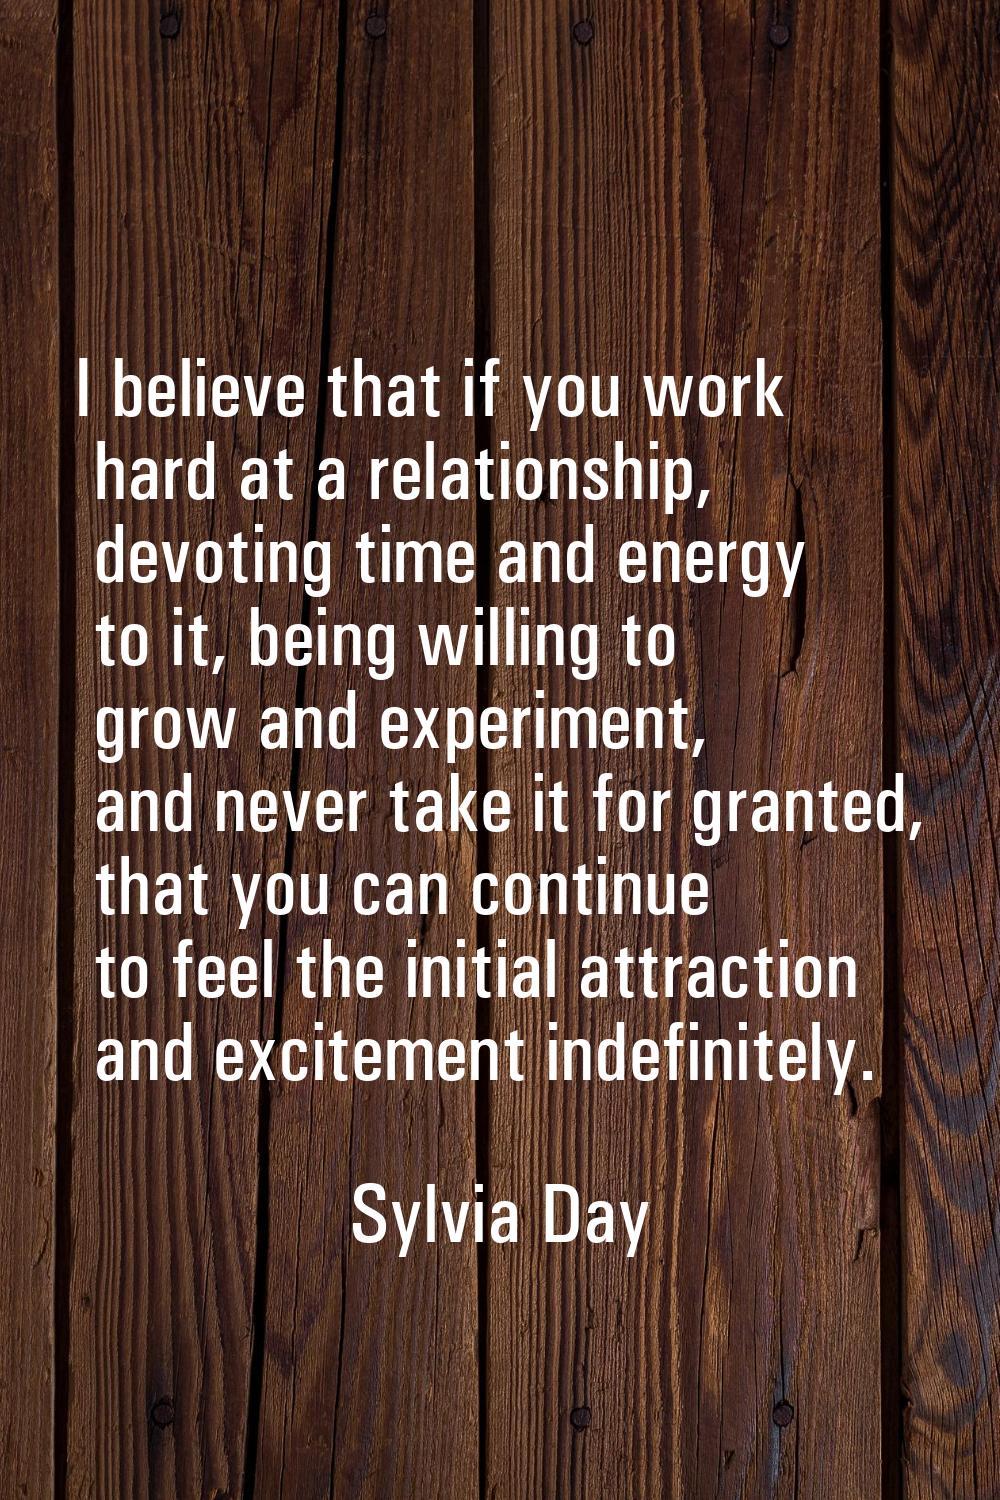 I believe that if you work hard at a relationship, devoting time and energy to it, being willing to